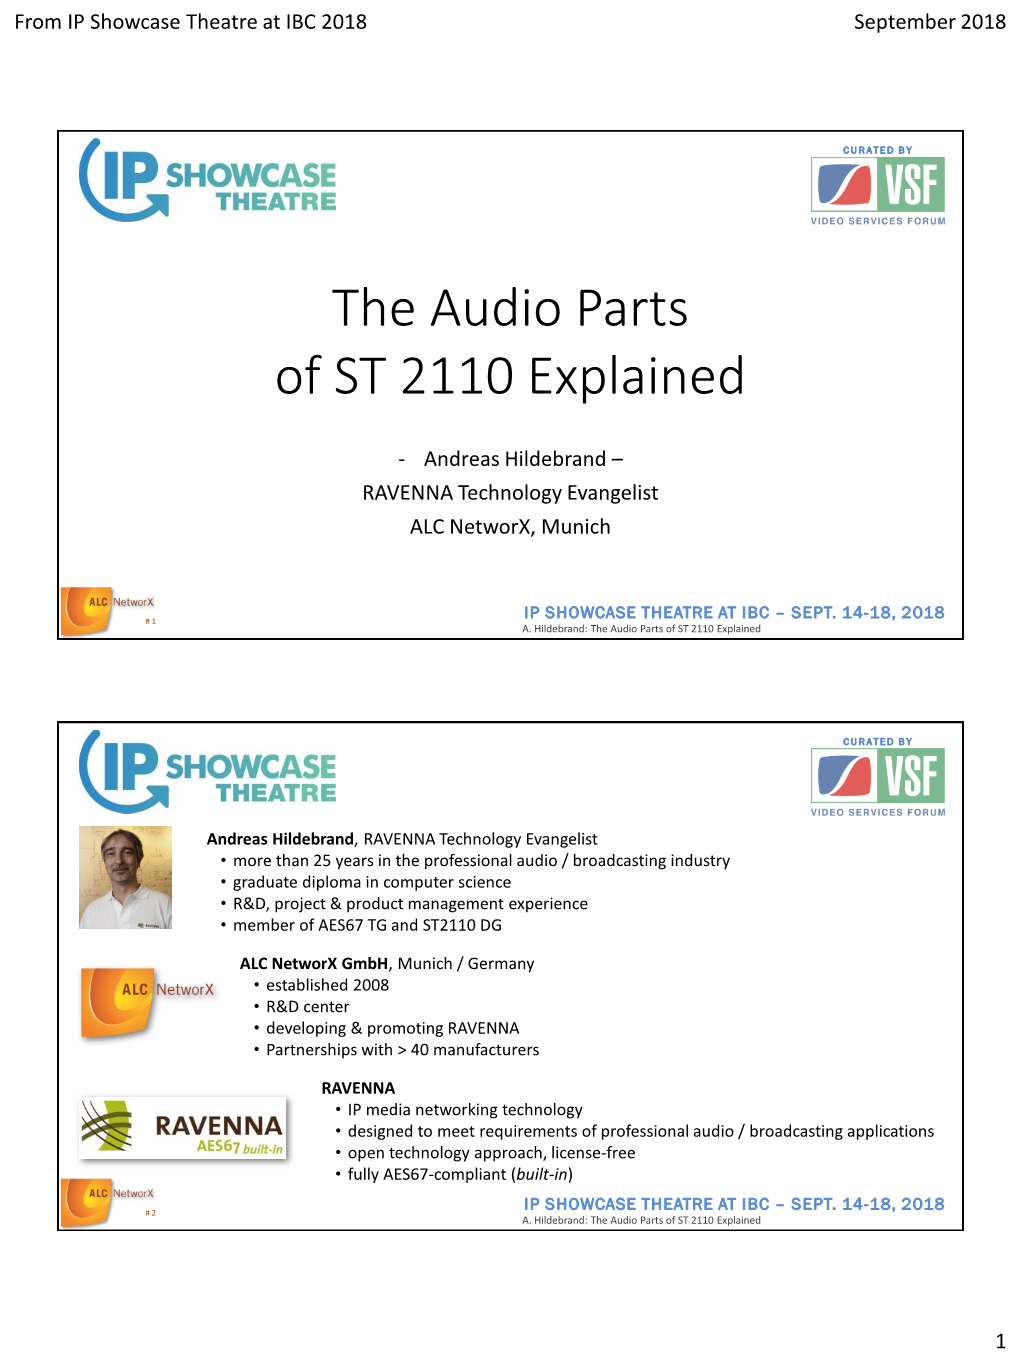 The Audio Parts of ST 2110 Explained